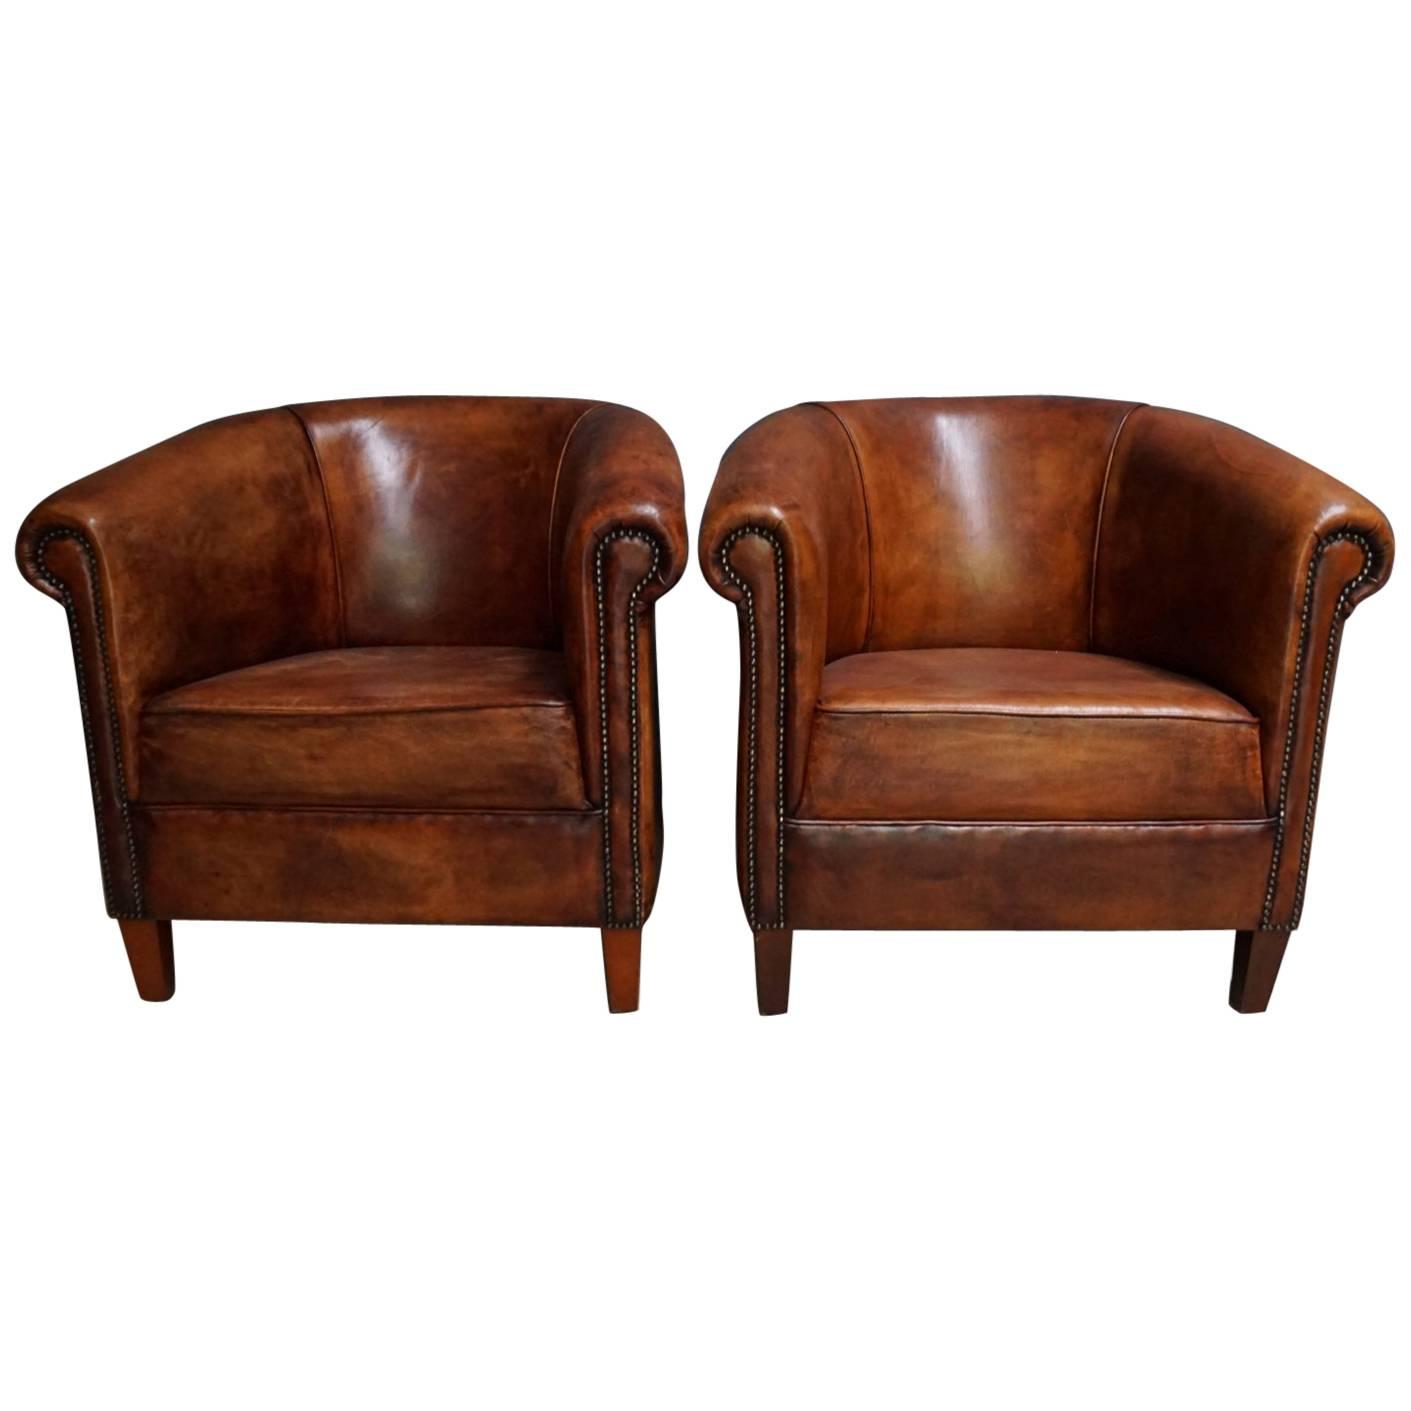 Vintage Dutch Cognac Leather Club Chairs, Set of Two For Sale